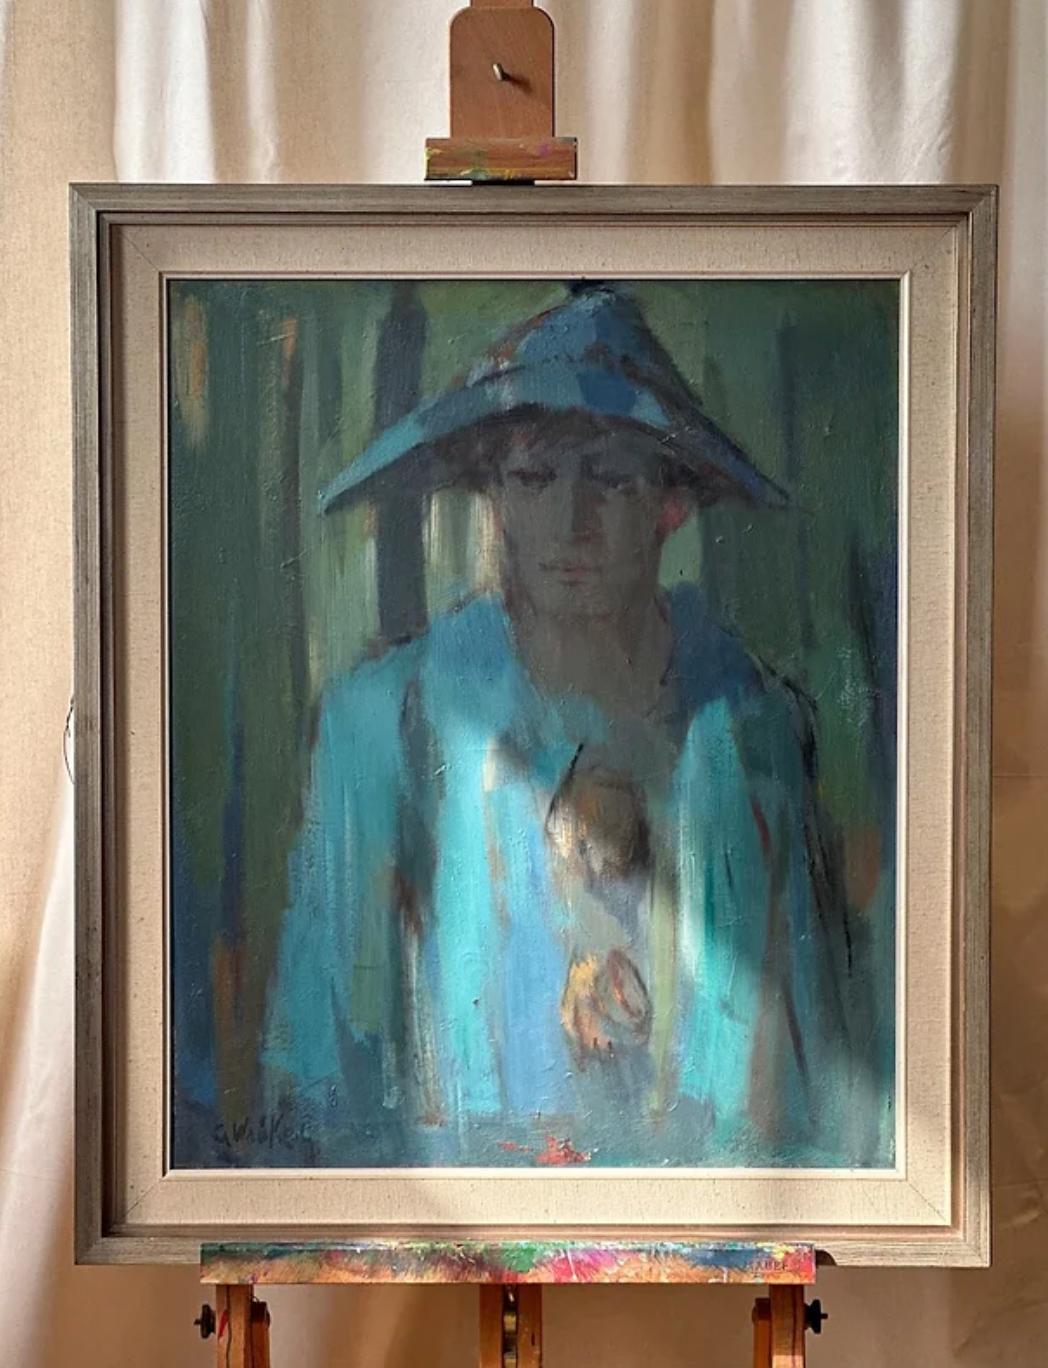 20th Century Framed Harlequin, Oil Painting By Gertrud Wrake-Lindqvist., Signed.